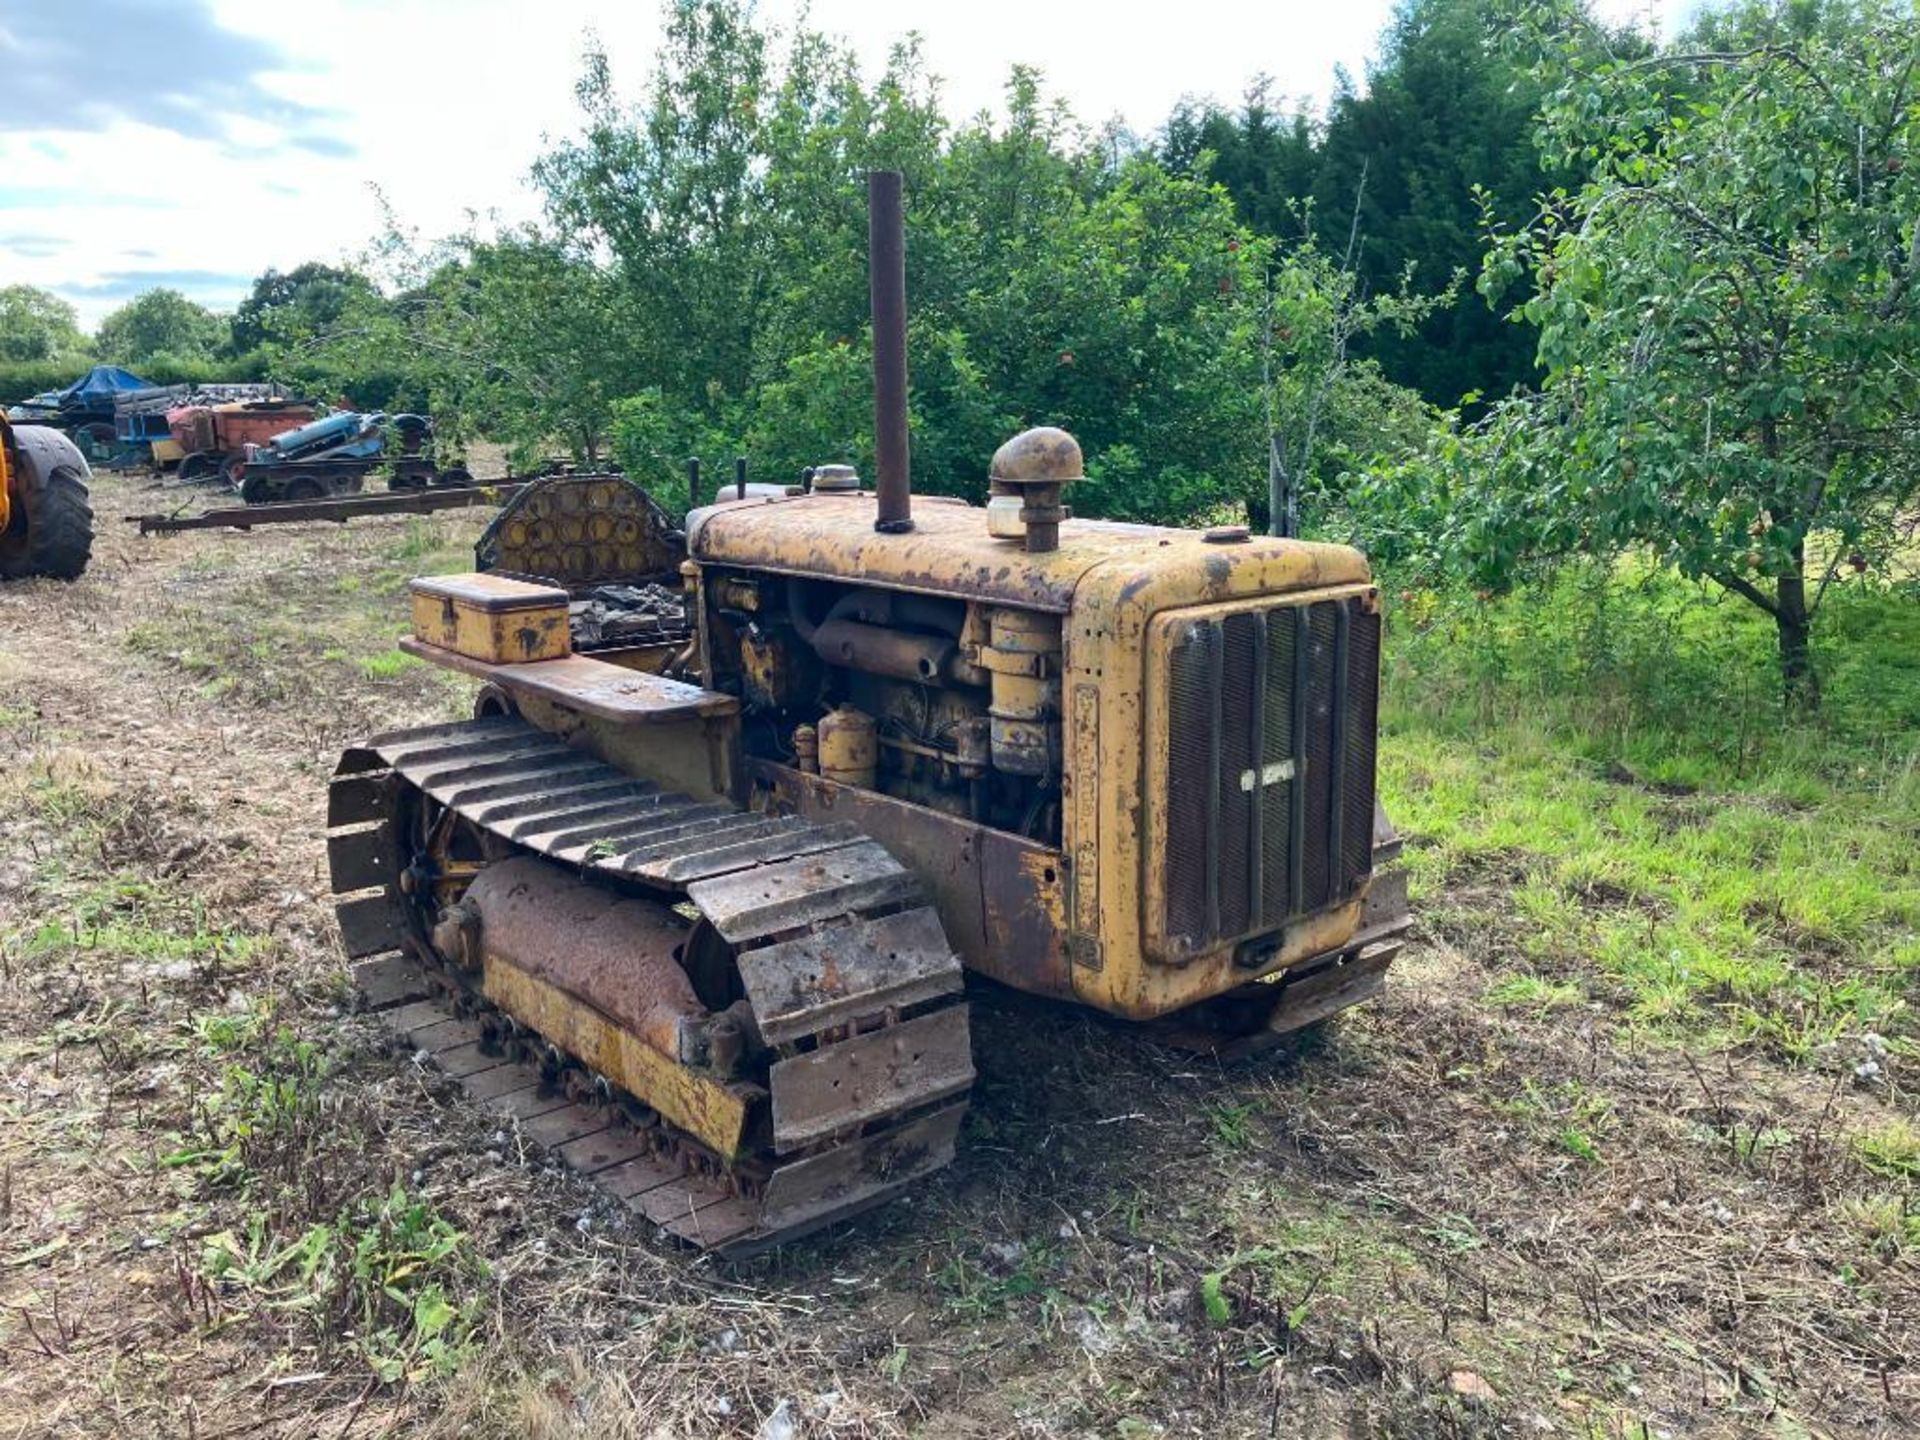 1941 Caterpillar D2 metal tracked crawler with 16" tracks, rear swinging drawbar and belt pulley. Ho - Image 2 of 15